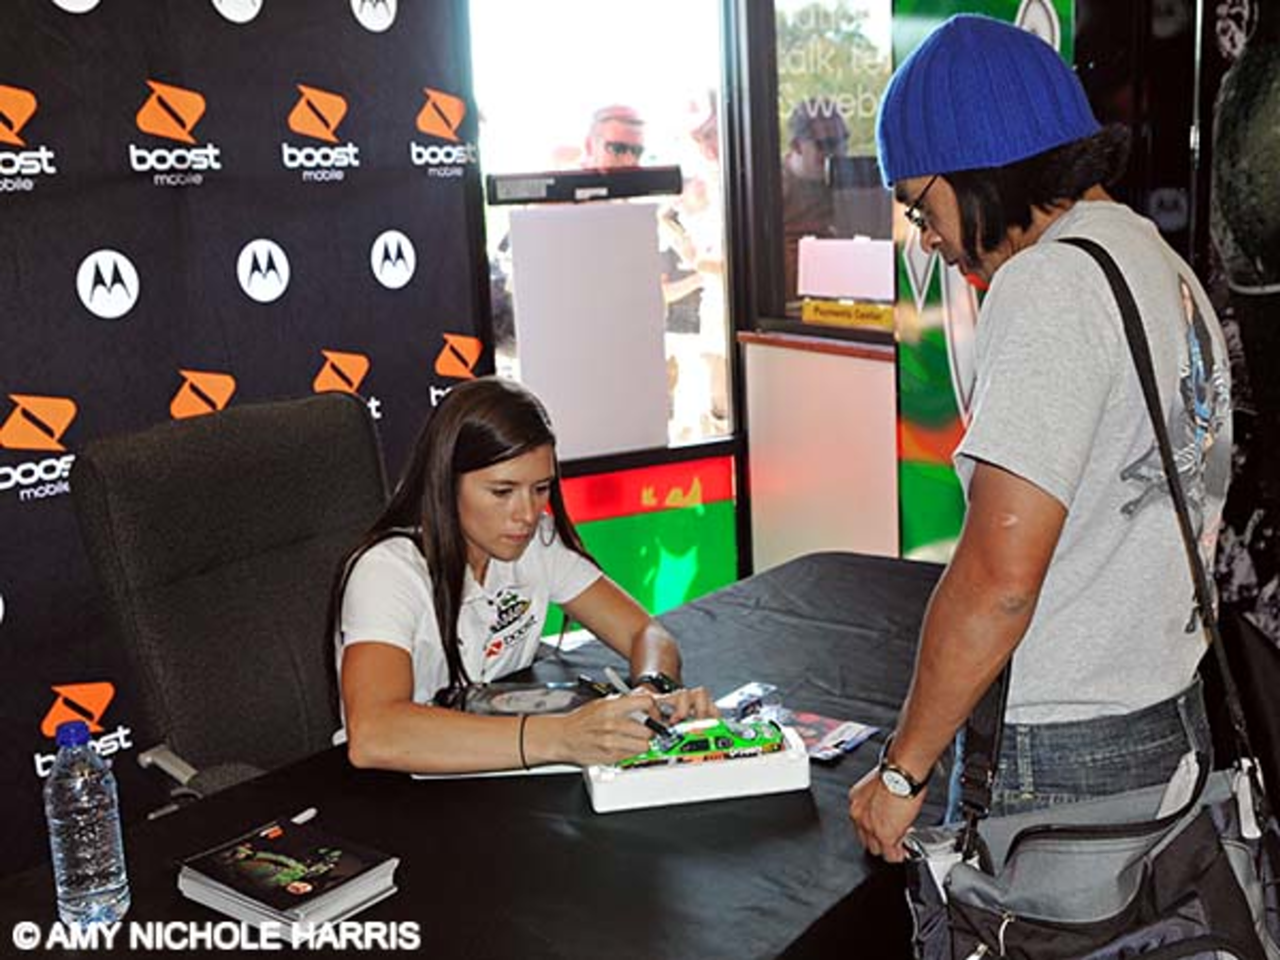 Danica Patrick in Cincinnati, Ohio makes an appearance to meet fans to promote Boost Mobile and the Kentucky Indy 300 on Friday September 2, 2010. The race takes place at Kentucky Speedway on Saturday September 4, 2010.